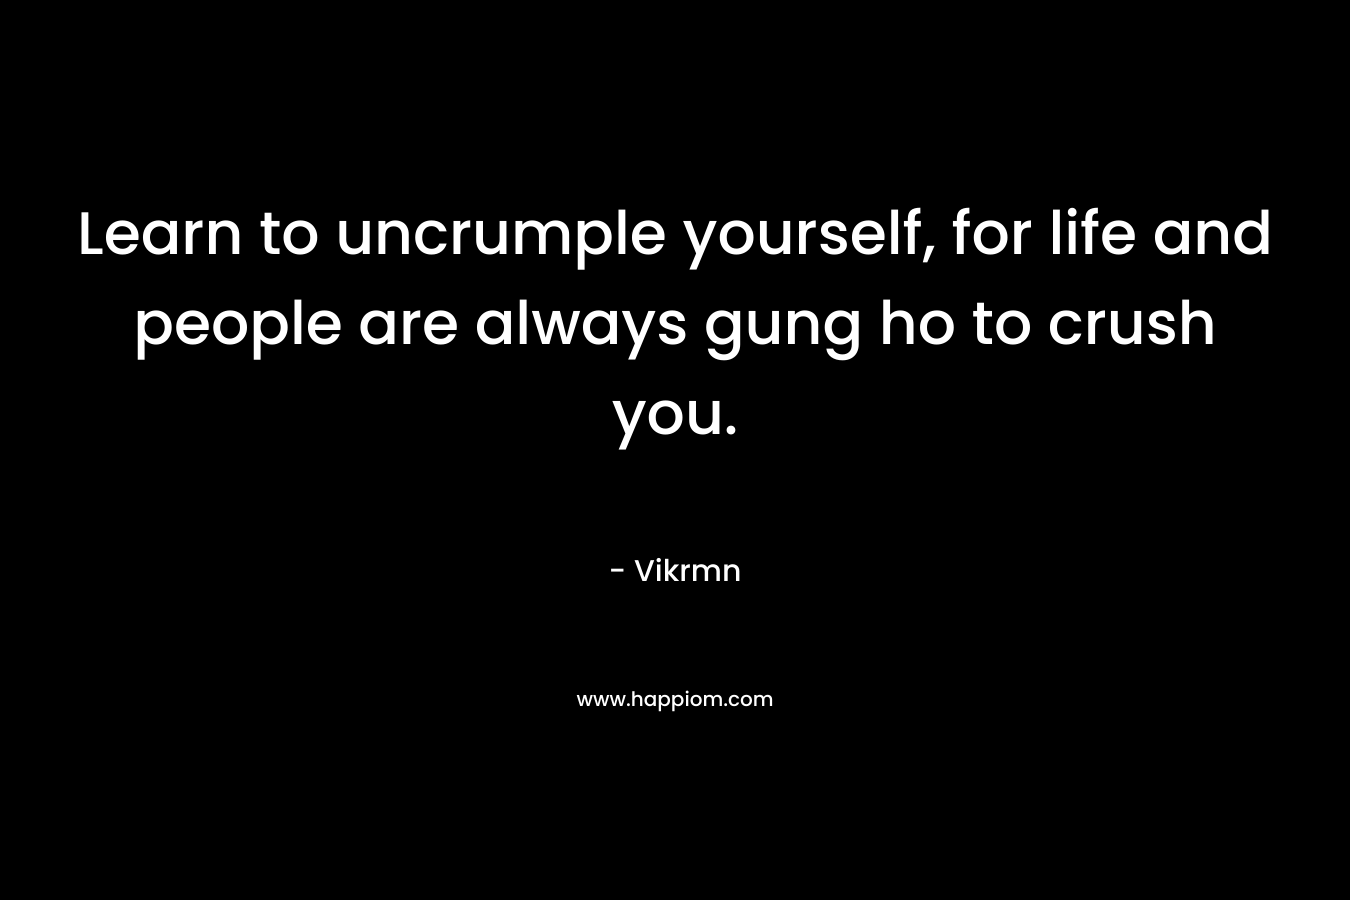 Learn to uncrumple yourself, for life and people are always gung ho to crush you. – Vikrmn